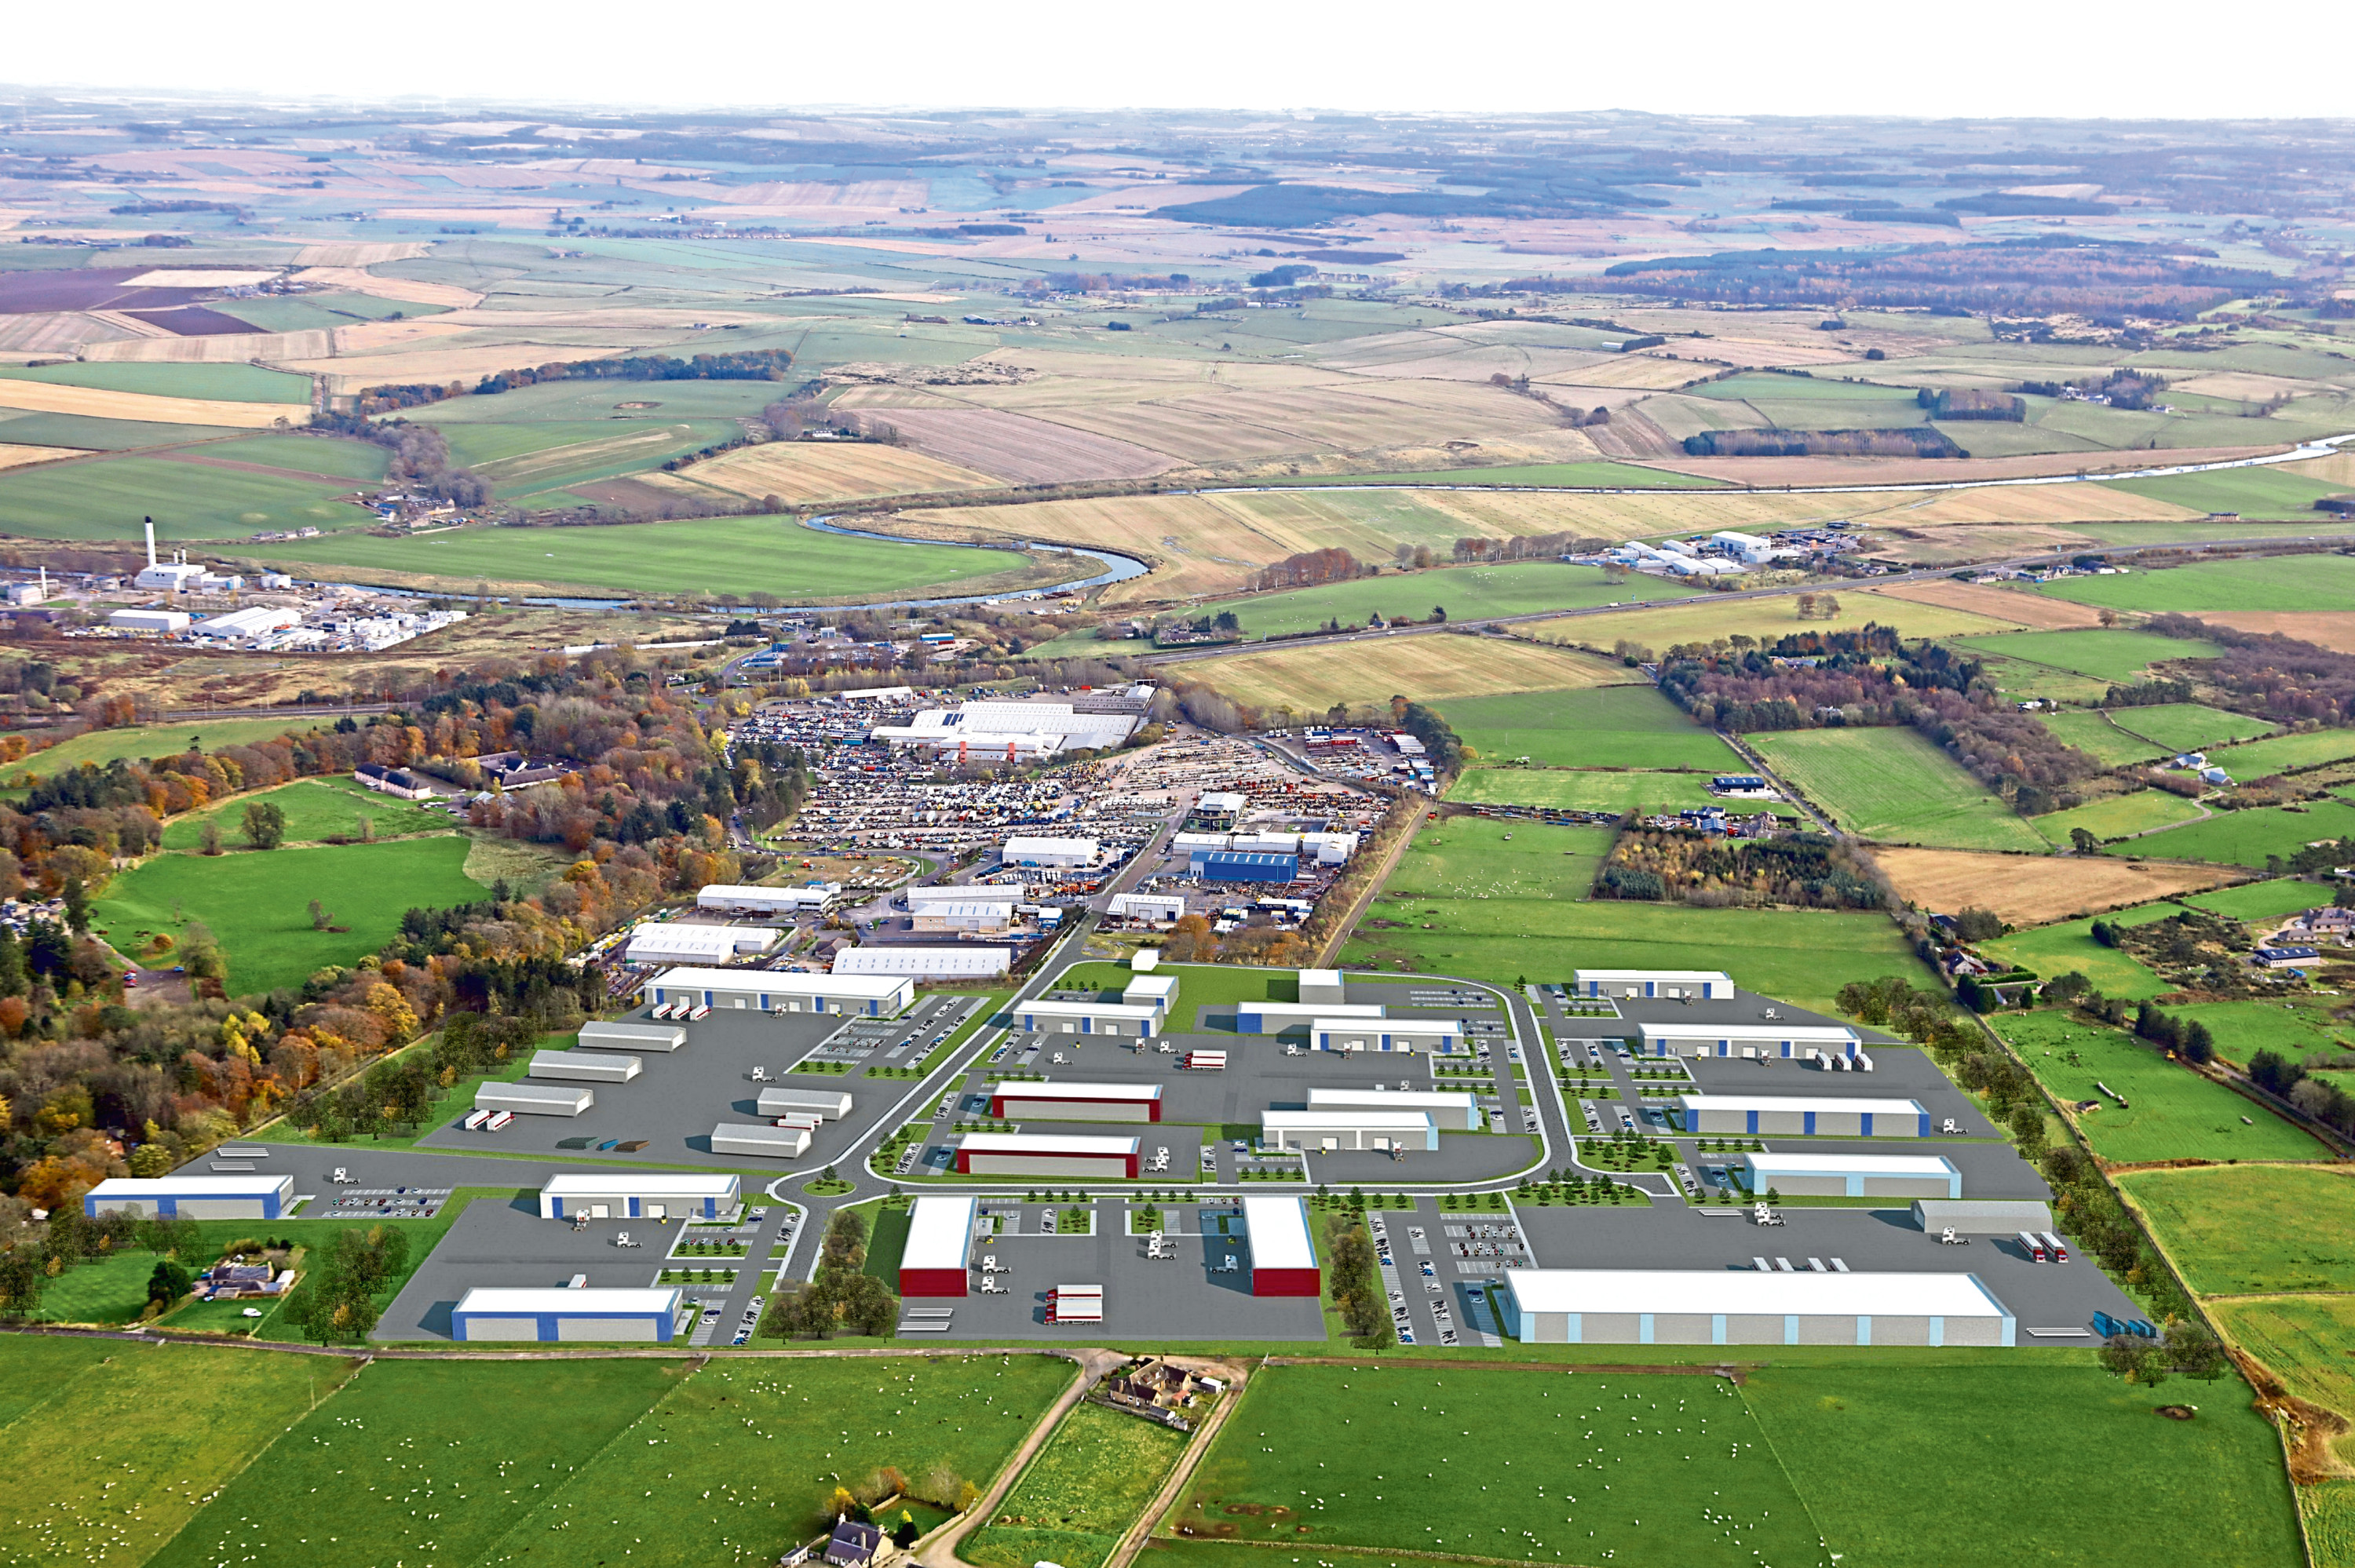 An aerial view of the business park with the proposed expansion.